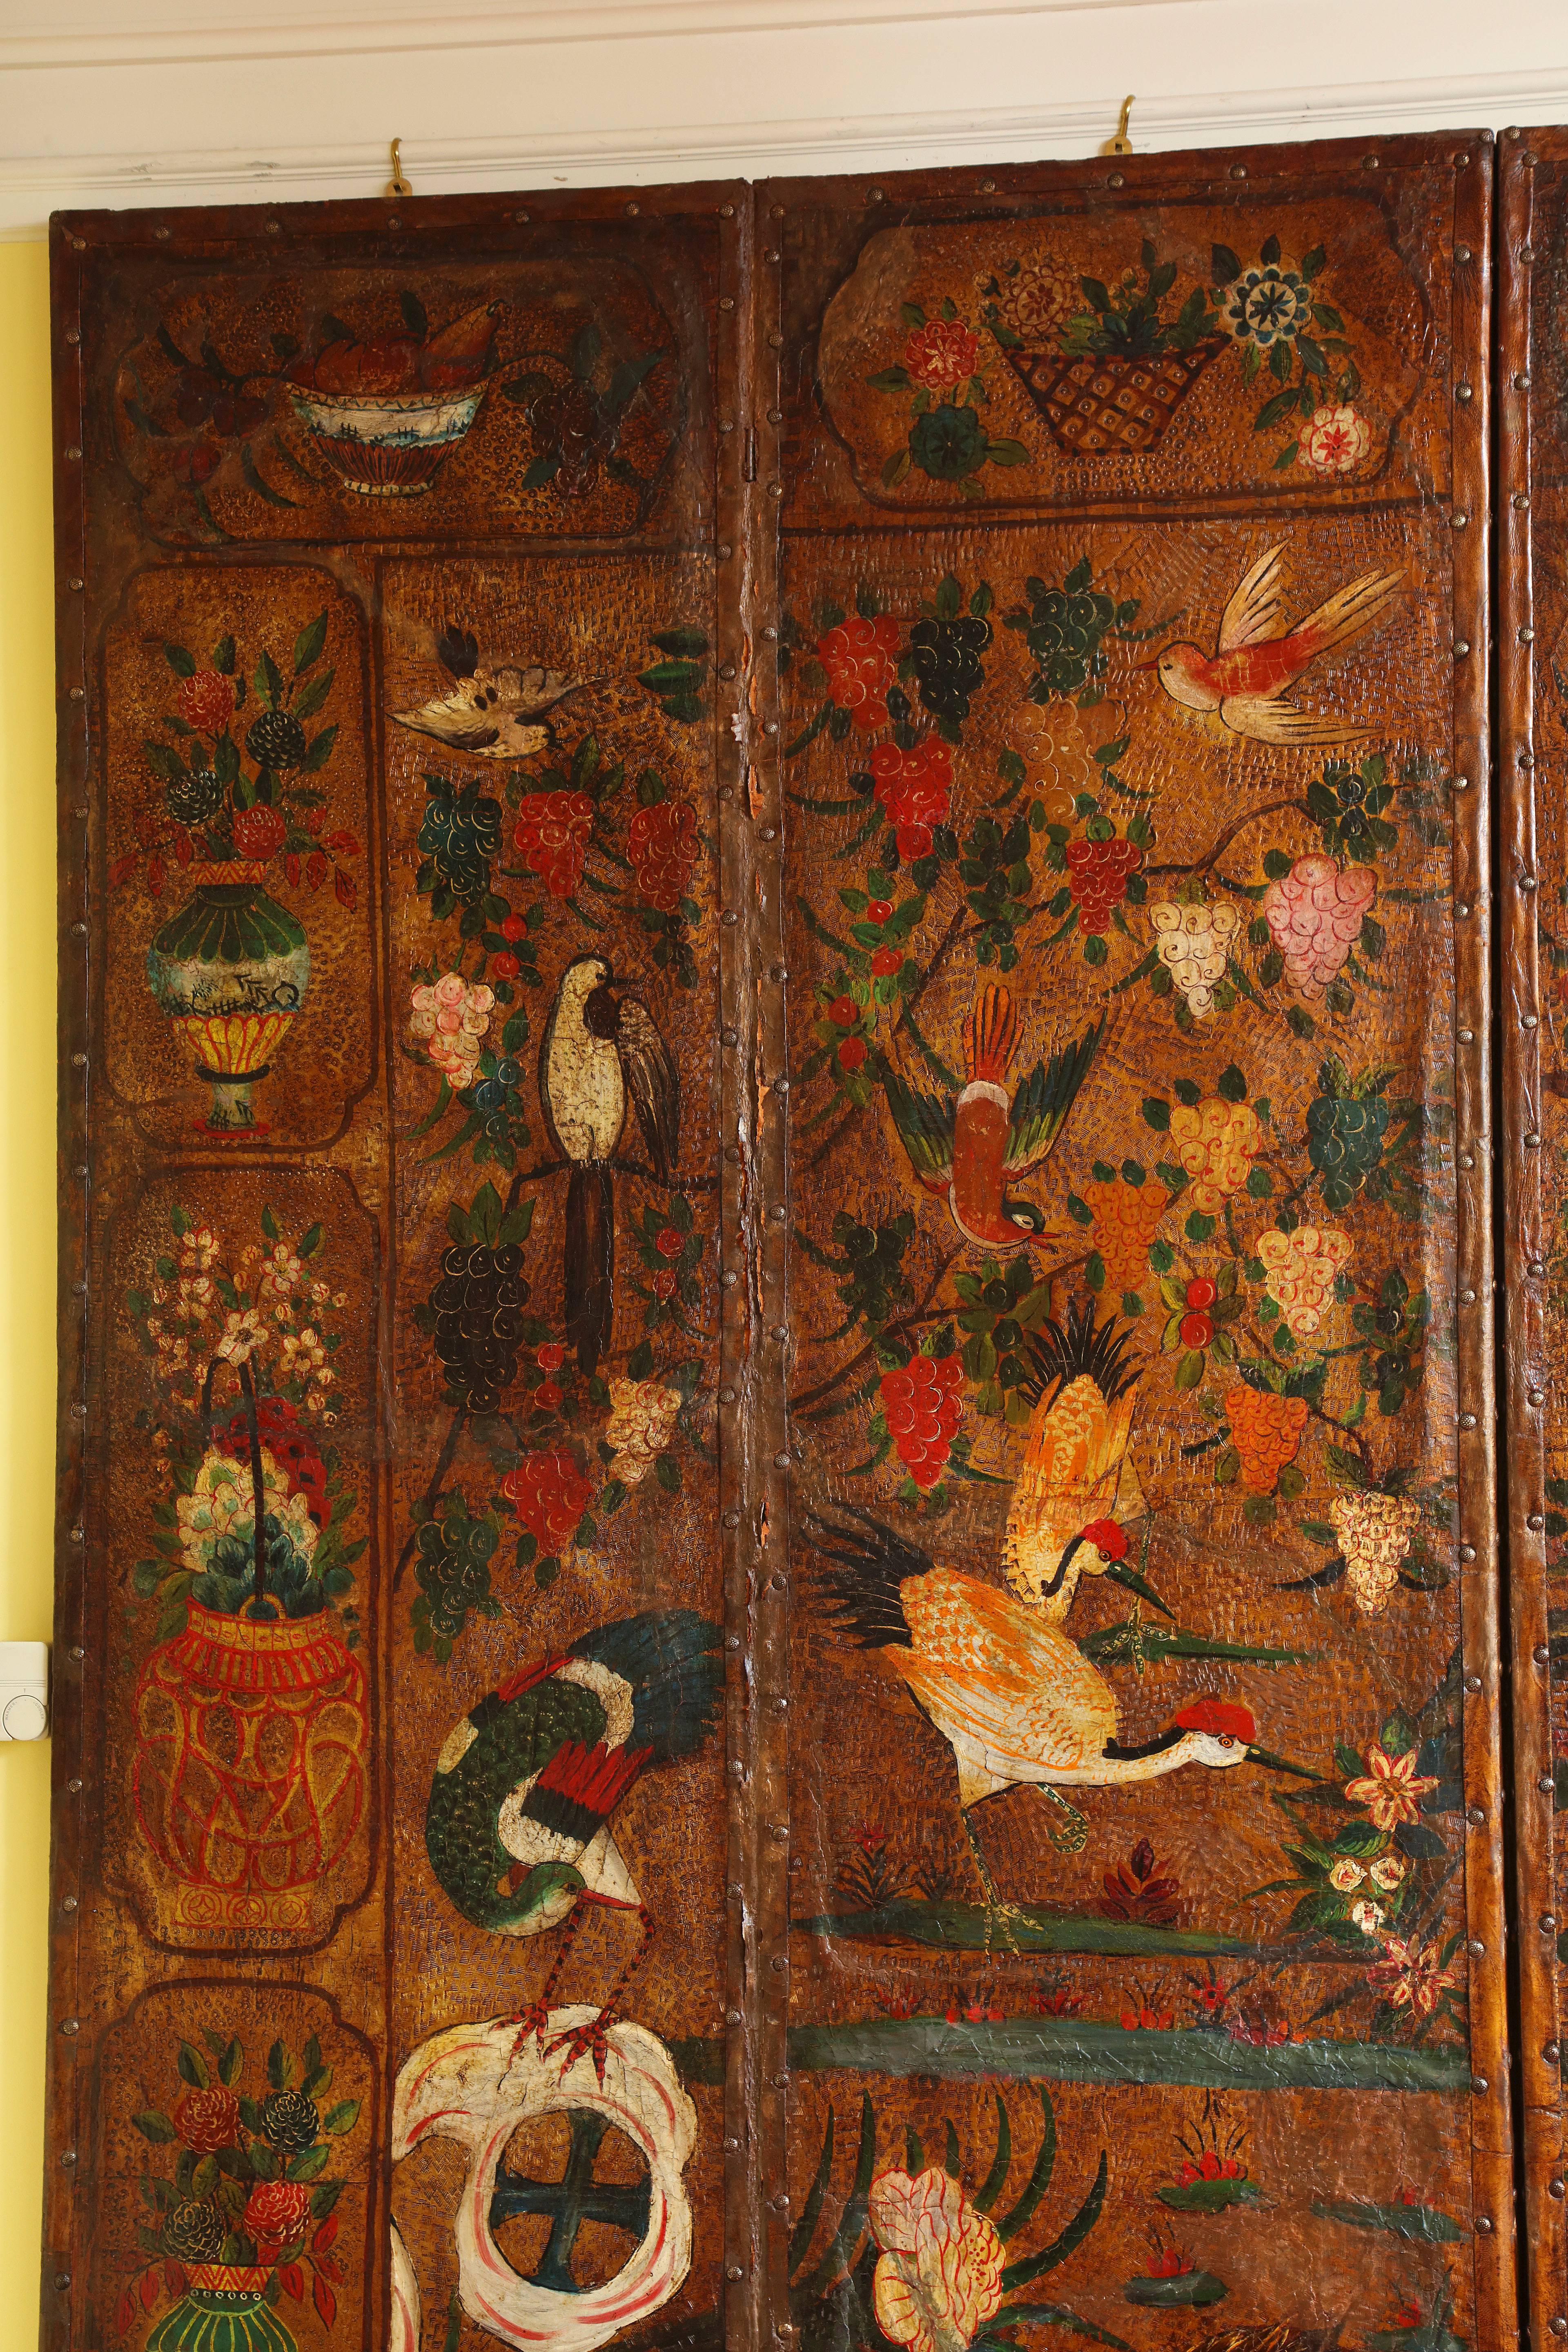 Very Fine English Six Panel Chinoiserie Decorated and Gilt Tooled Leather Screen, the center painted in vibrant original colors with birds and flowering branches with a border of symbolic antiques, all in imitation of a 17th century Chinese